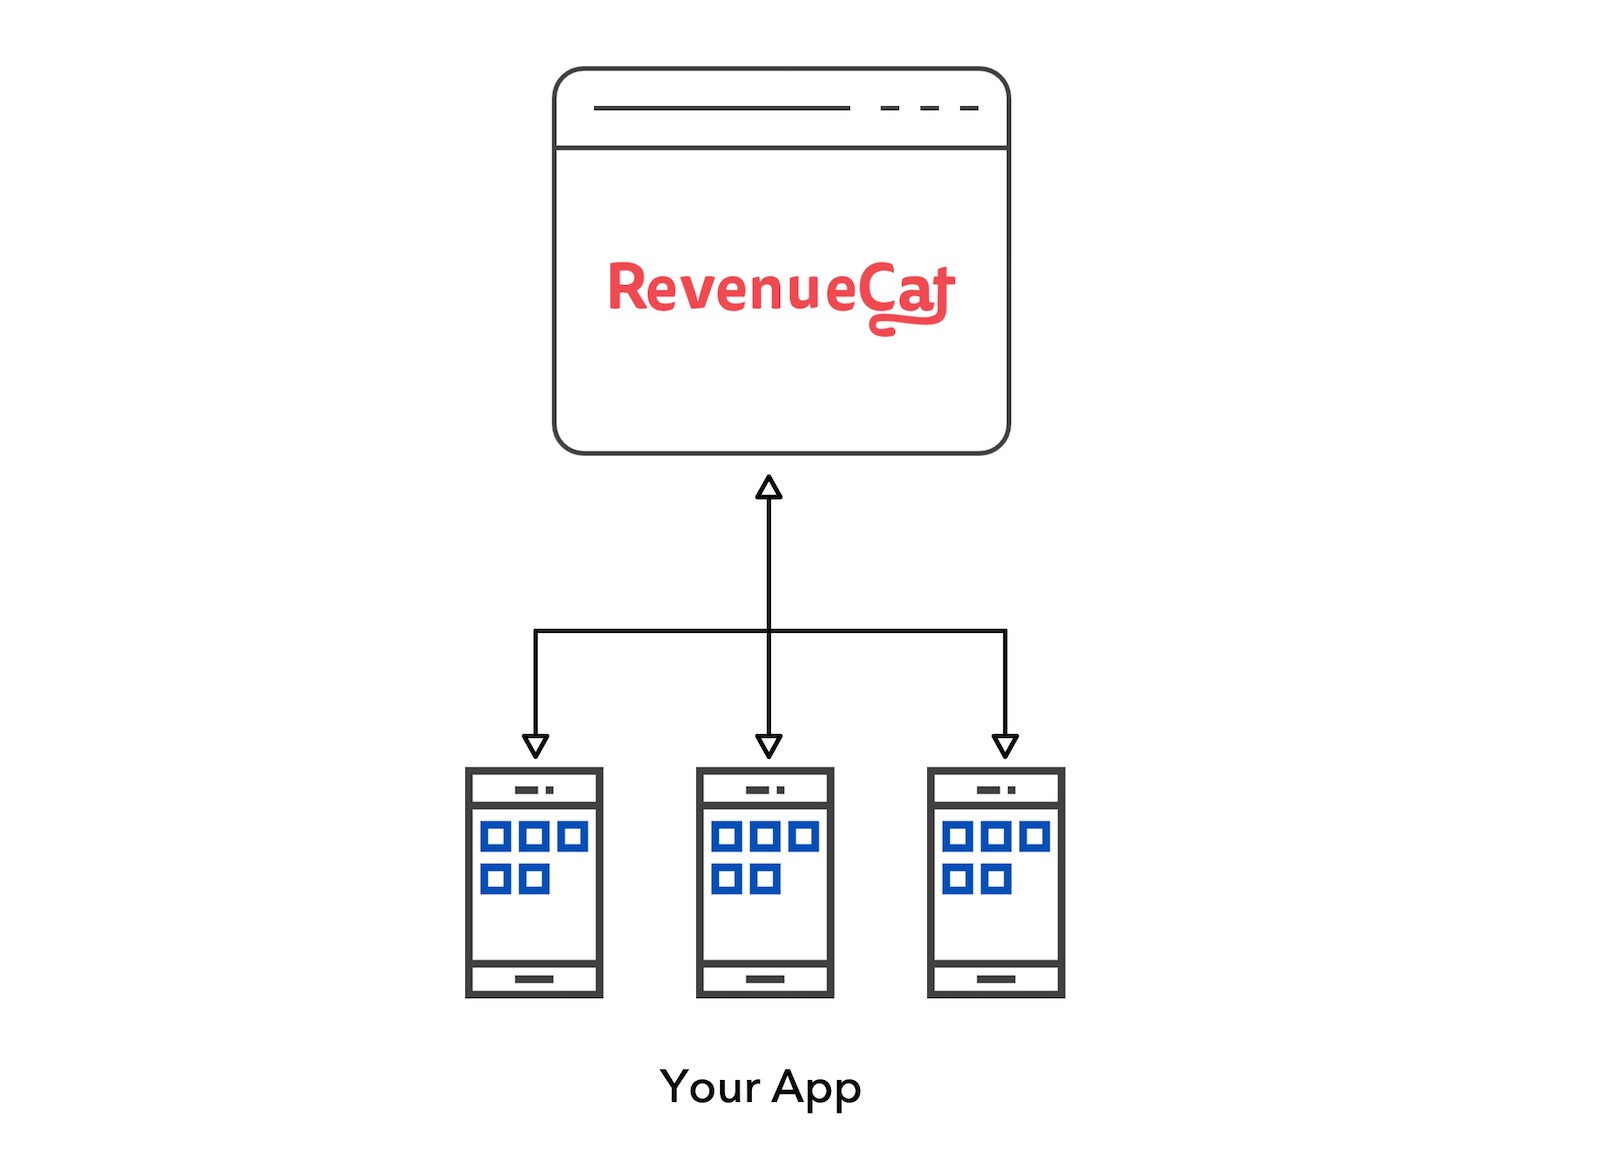 Architecture using only RevenueCat’s Purchases SDK to handle in-app purchases.